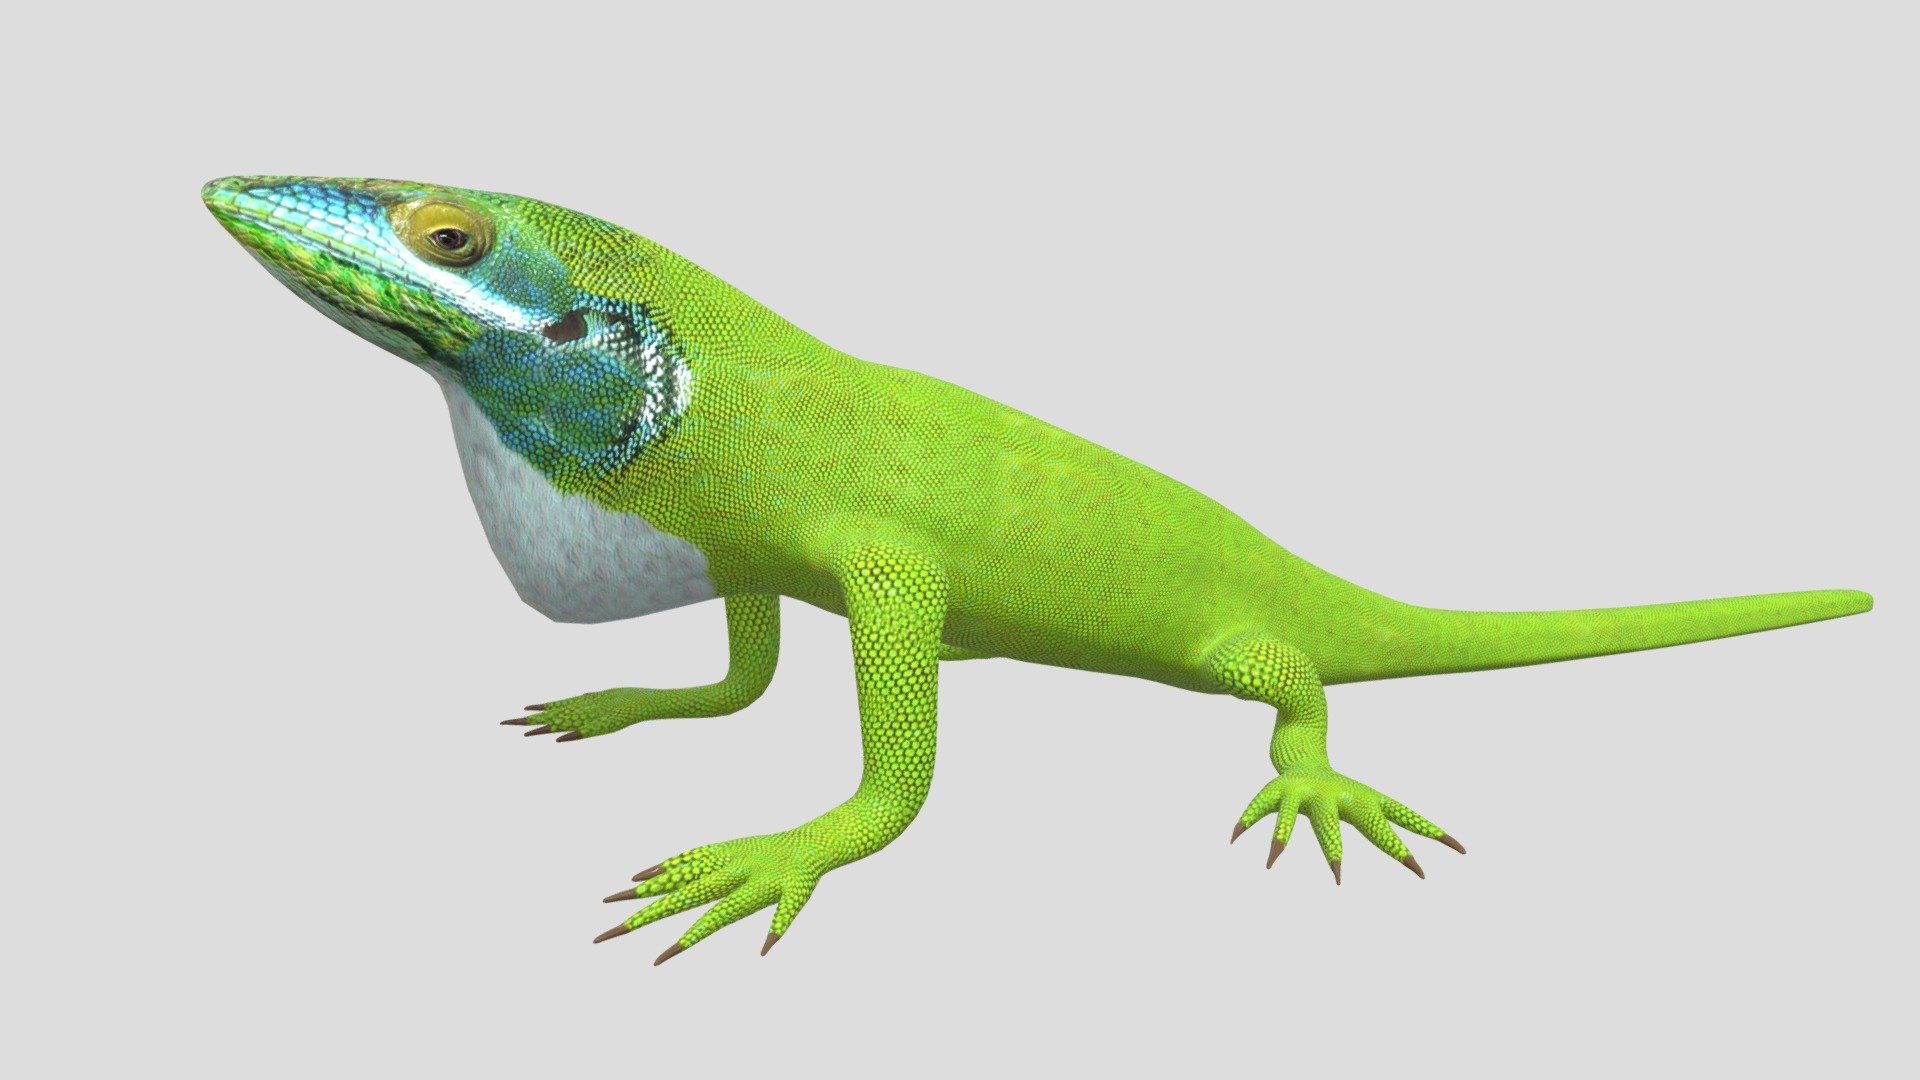 3d model of Anole lizard.
Textures:Color ,Normal and Roughness  maps 4096x4096 pxls JPEG 3d model